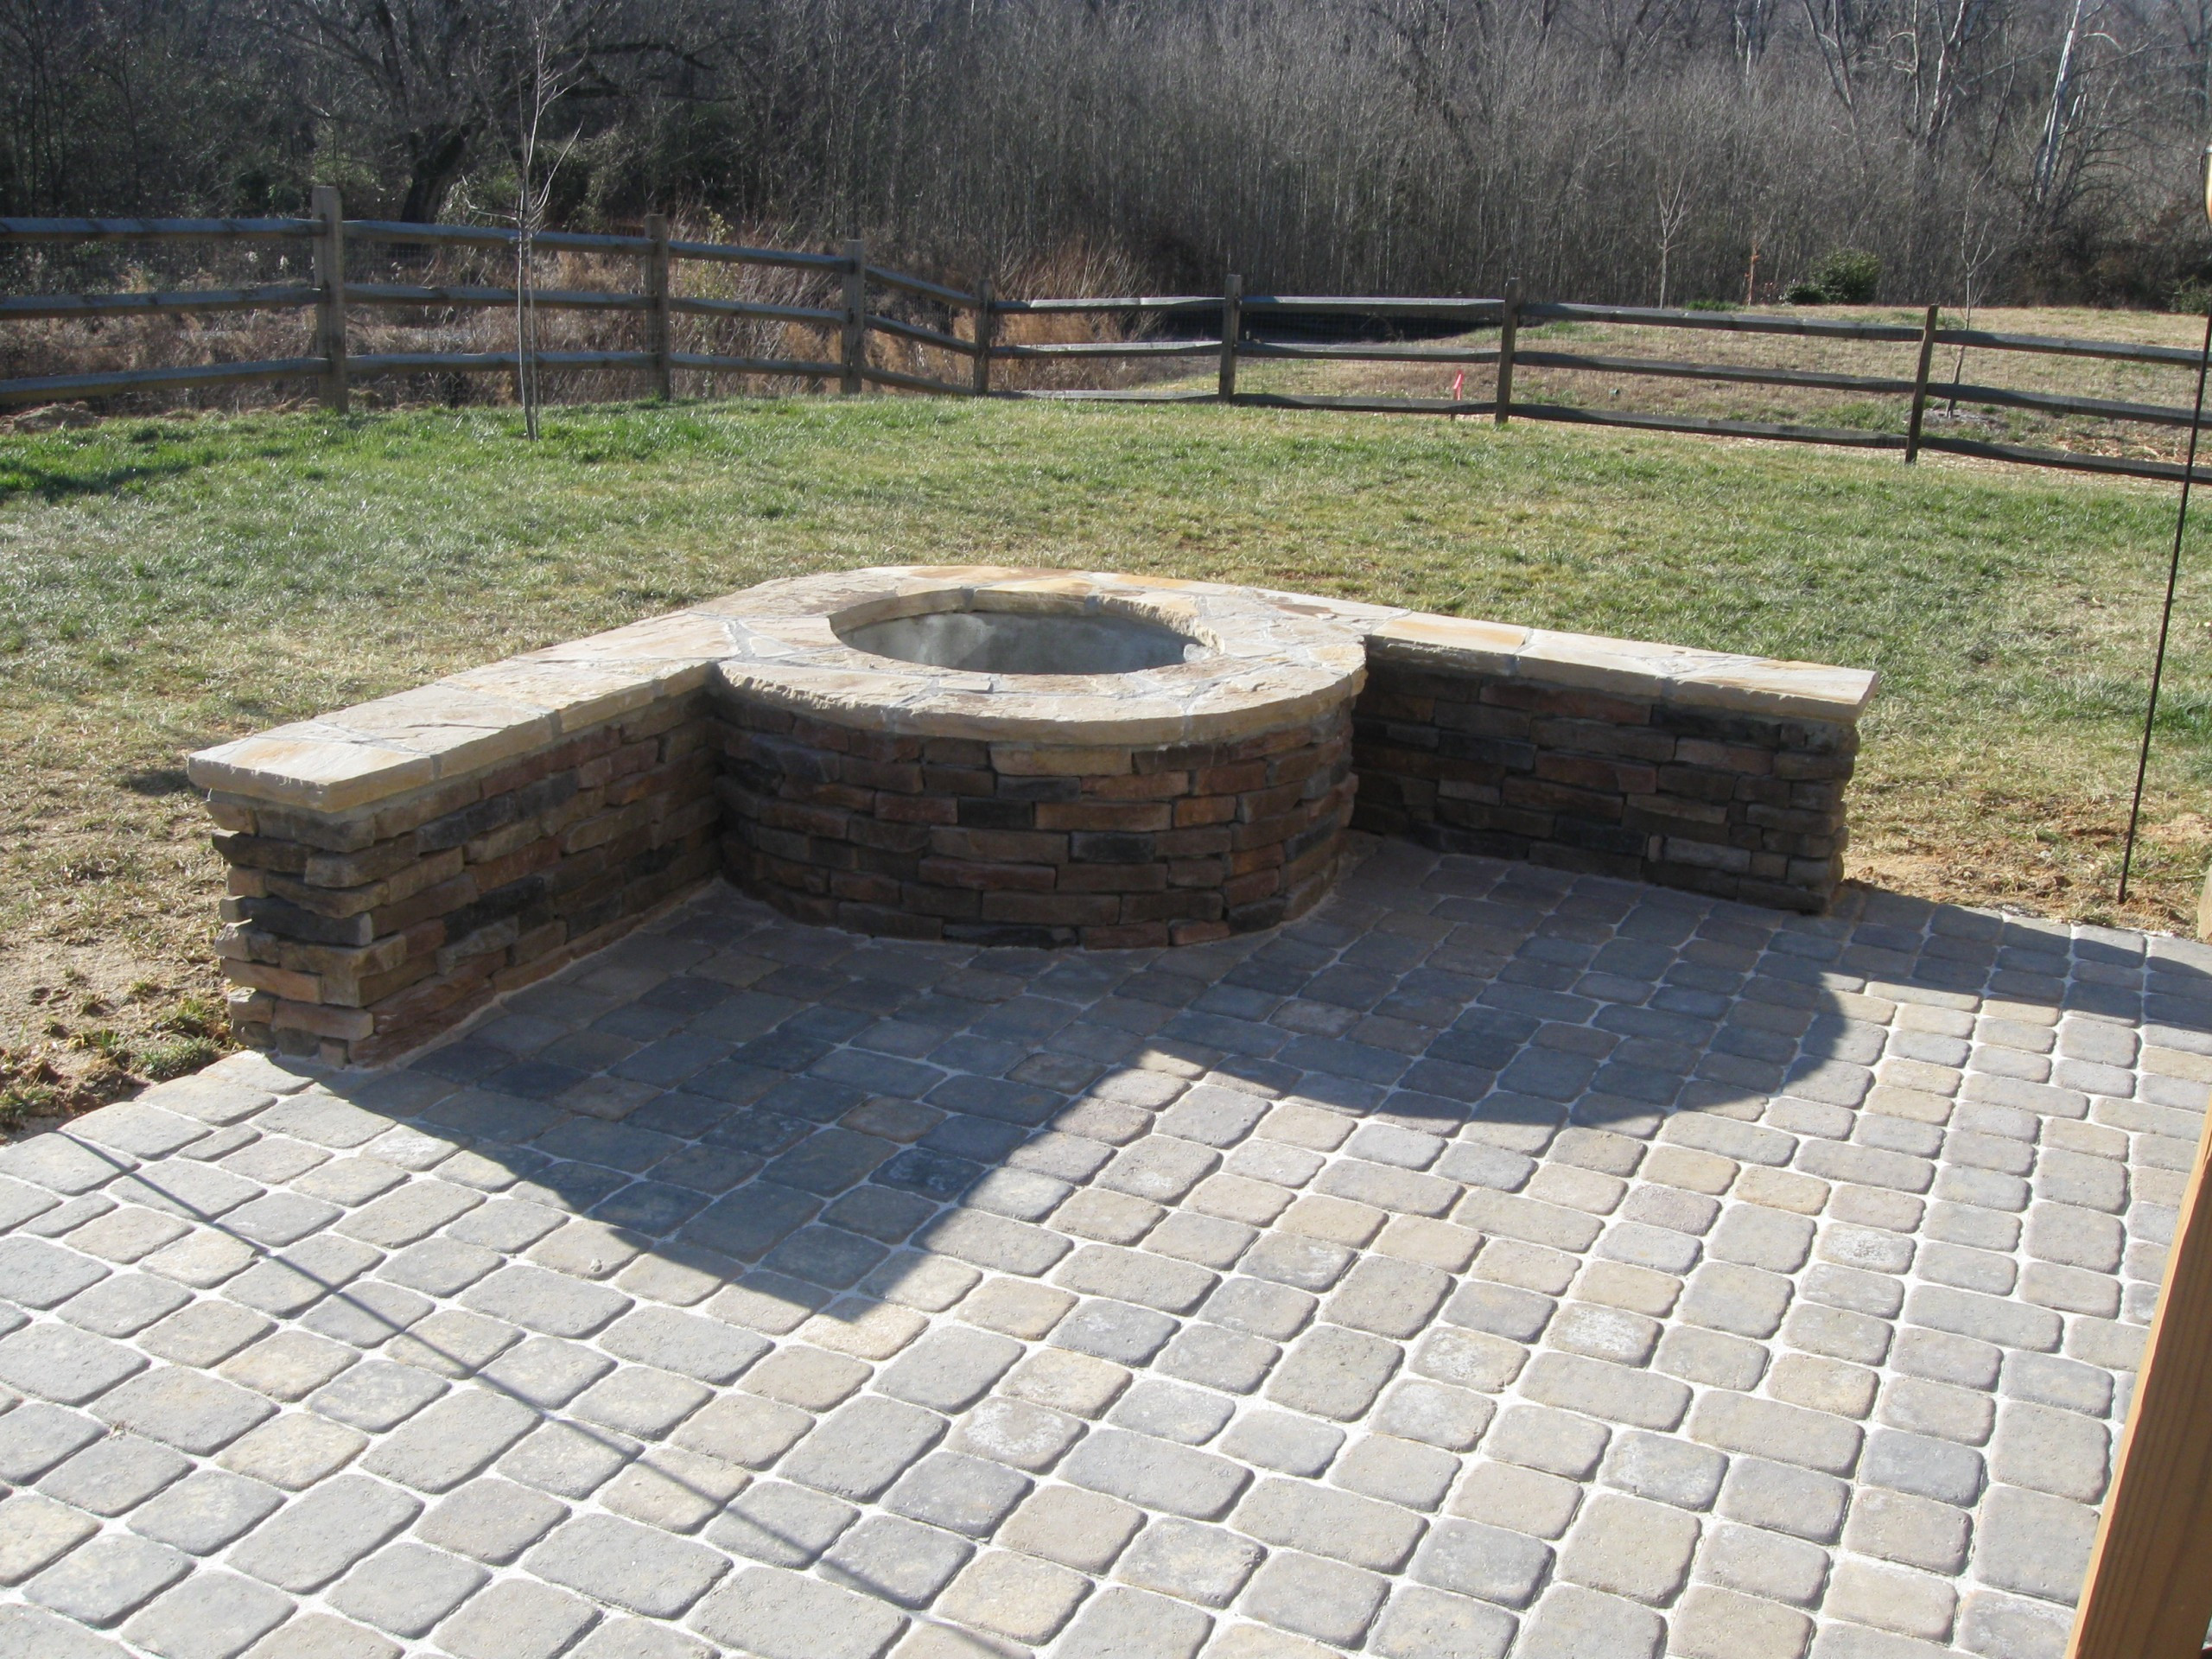 Stone Patio With Fire Pit
 How to build a stone outdoor patio